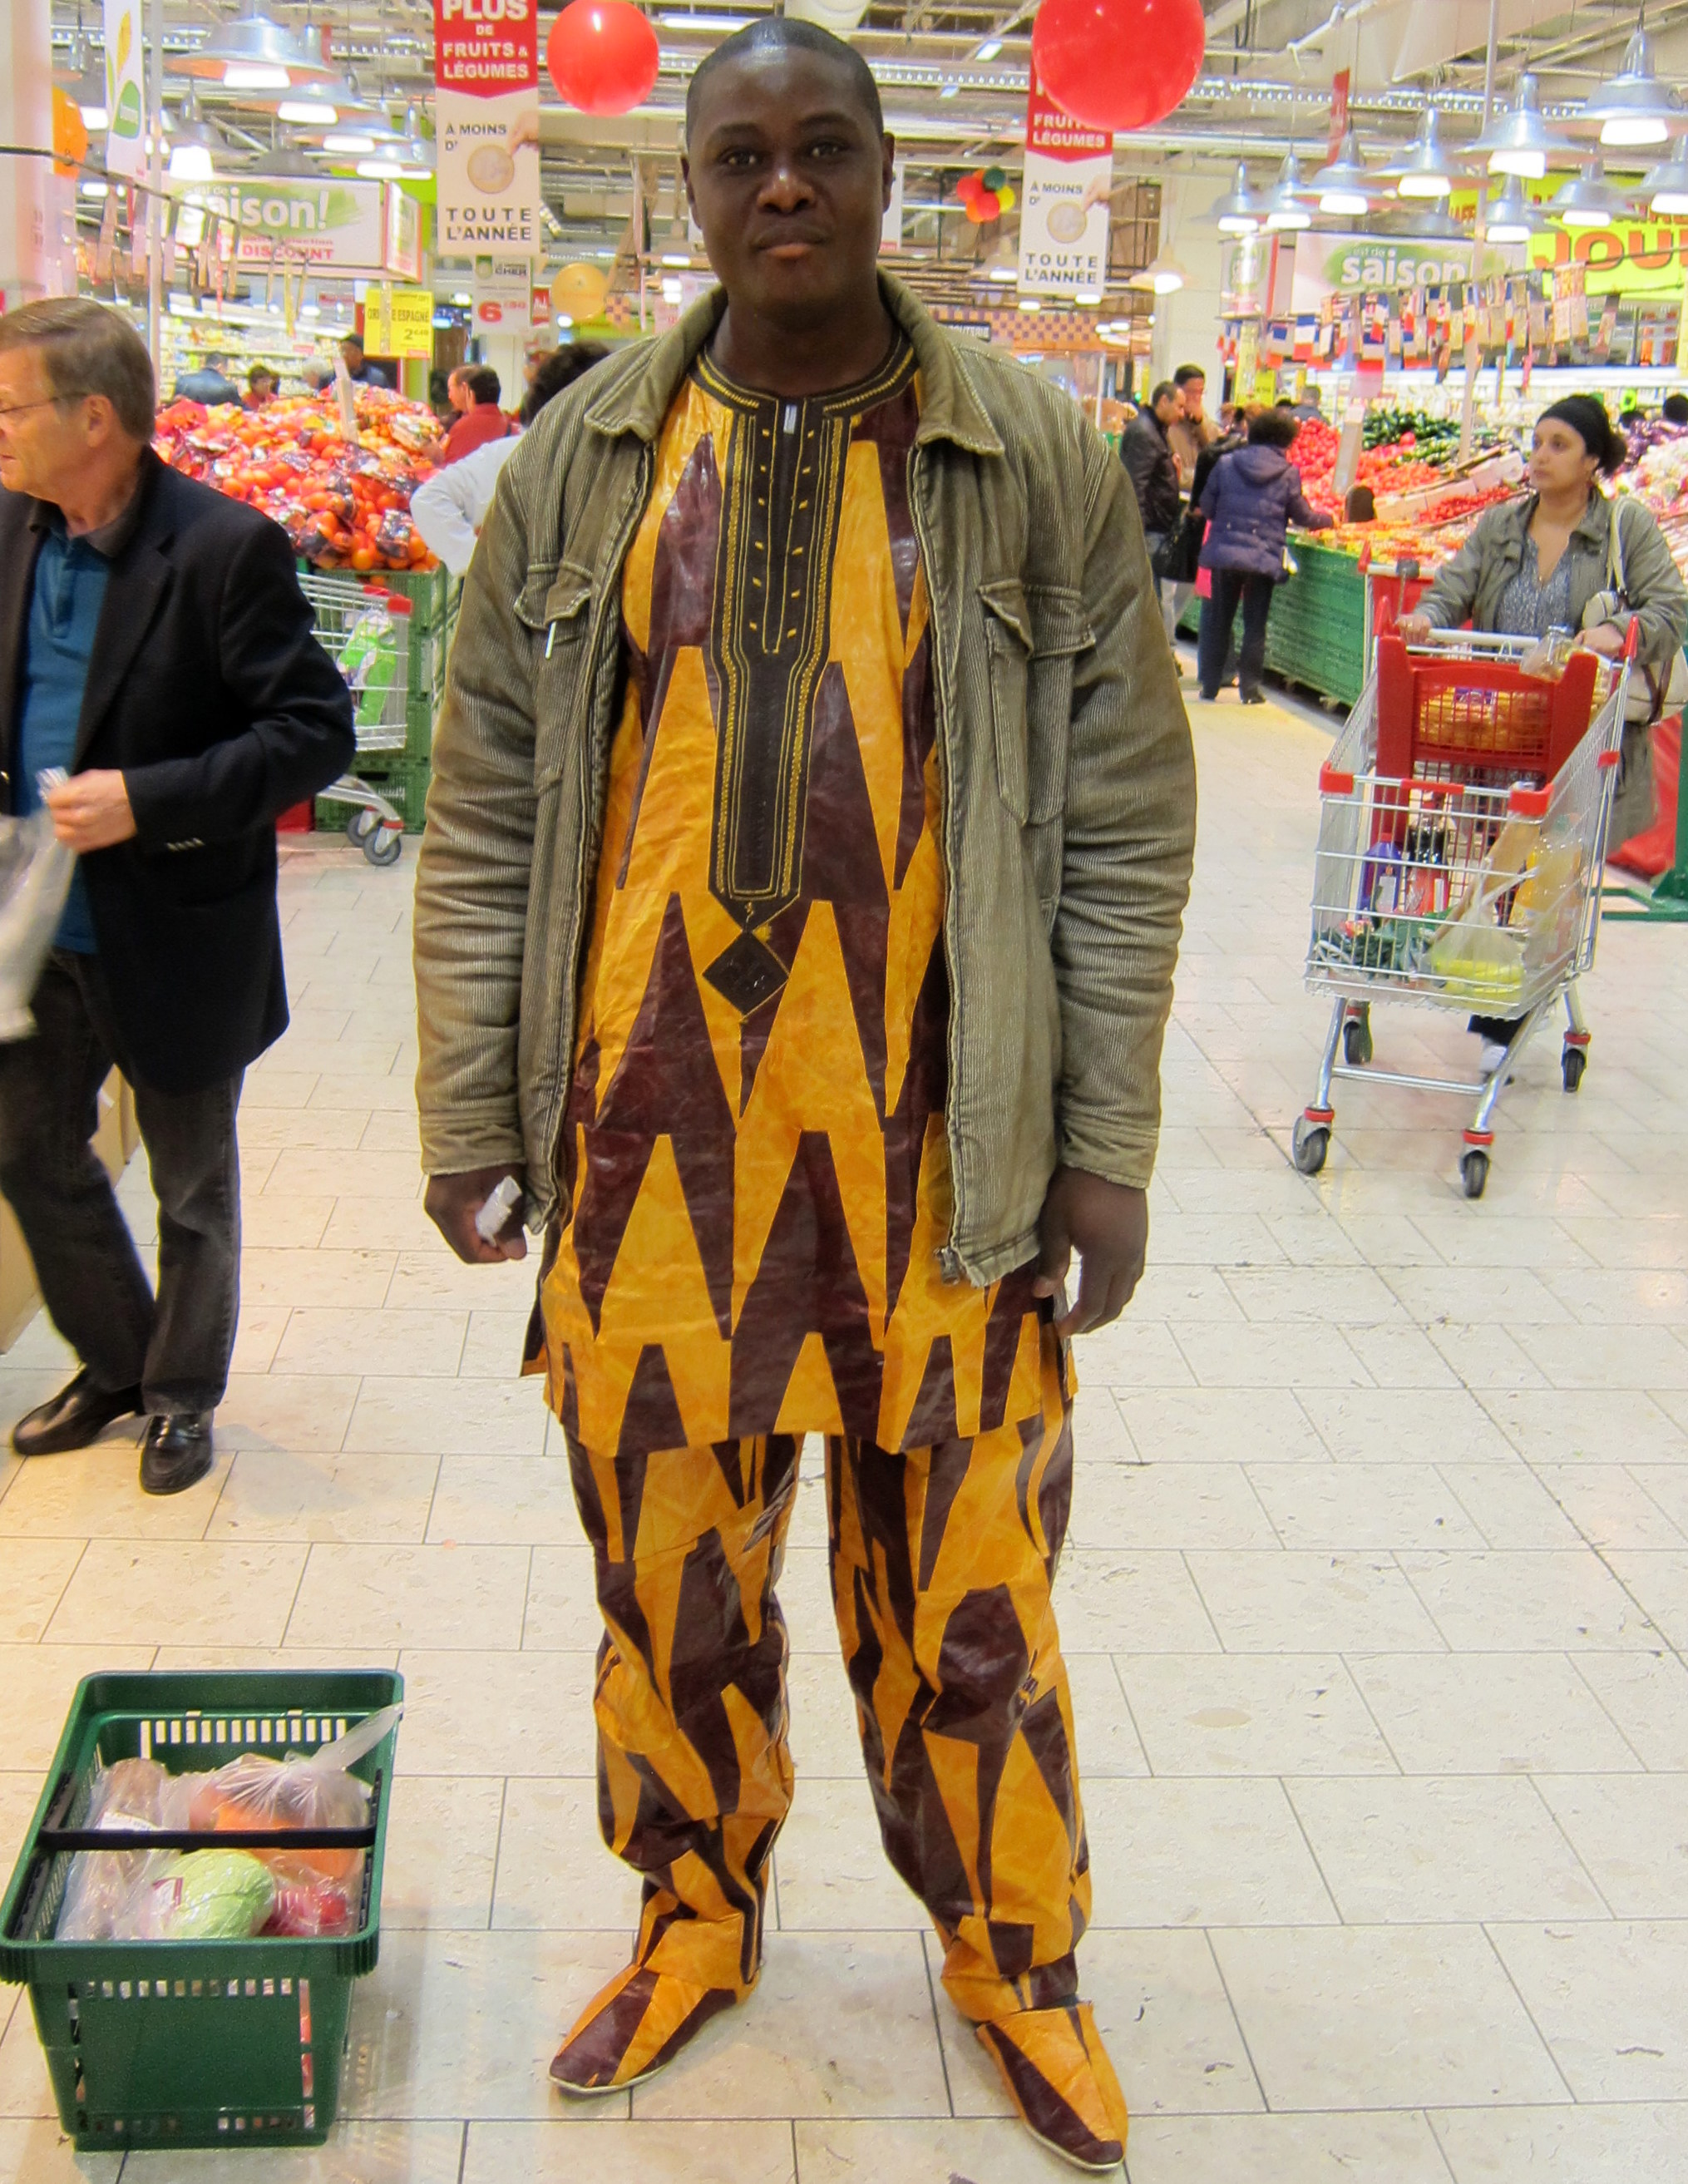  2012 in a Paris supermarket. &nbsp; I liked his outfit. 